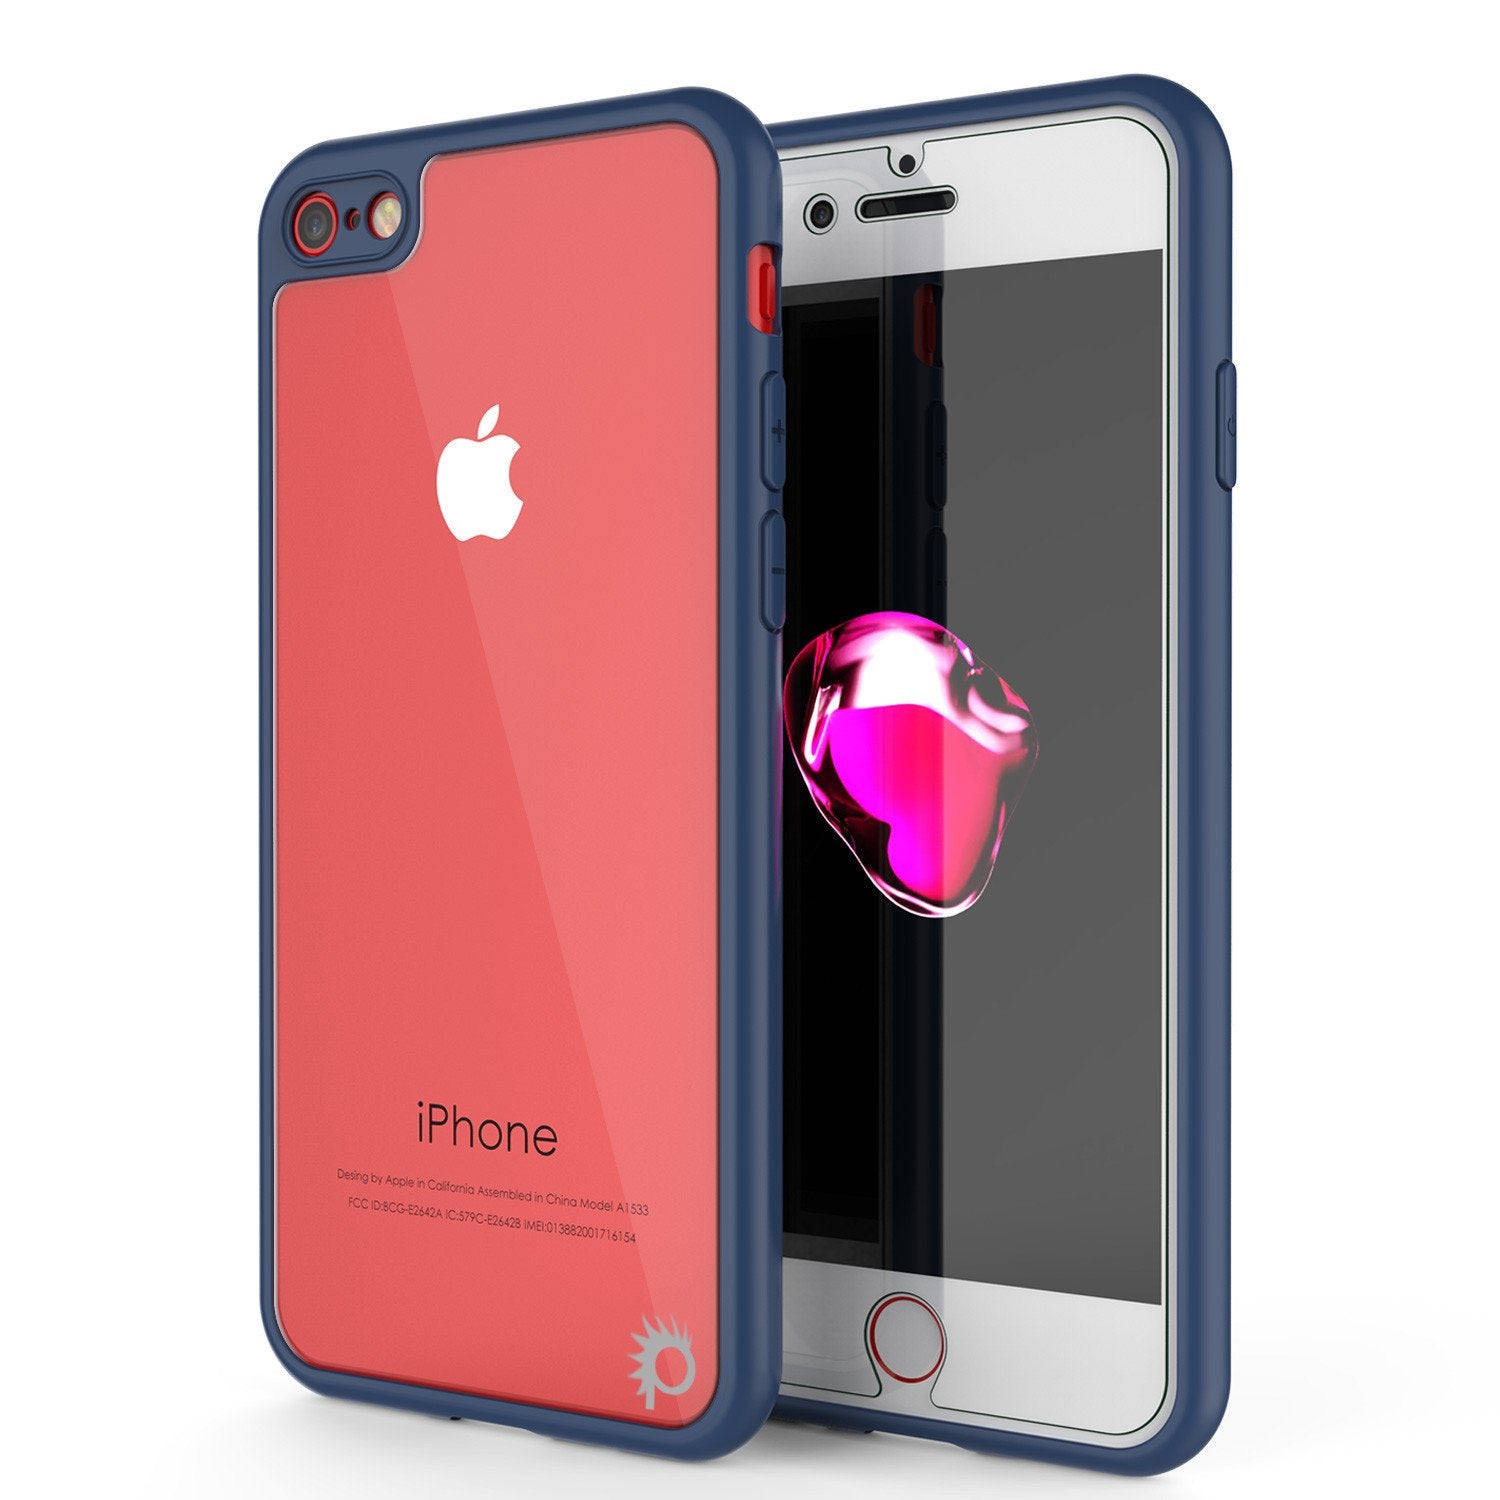 iPhone 7 Case, Punkcase [MASK Series] [NAVY] Full Body Hybrid Dual Layer TPU Cover [Clear Back] [Non Slip] [Ultra Thin Fit] W/ protective Tempered Glass Screen Protector for Apple iPhone 7S